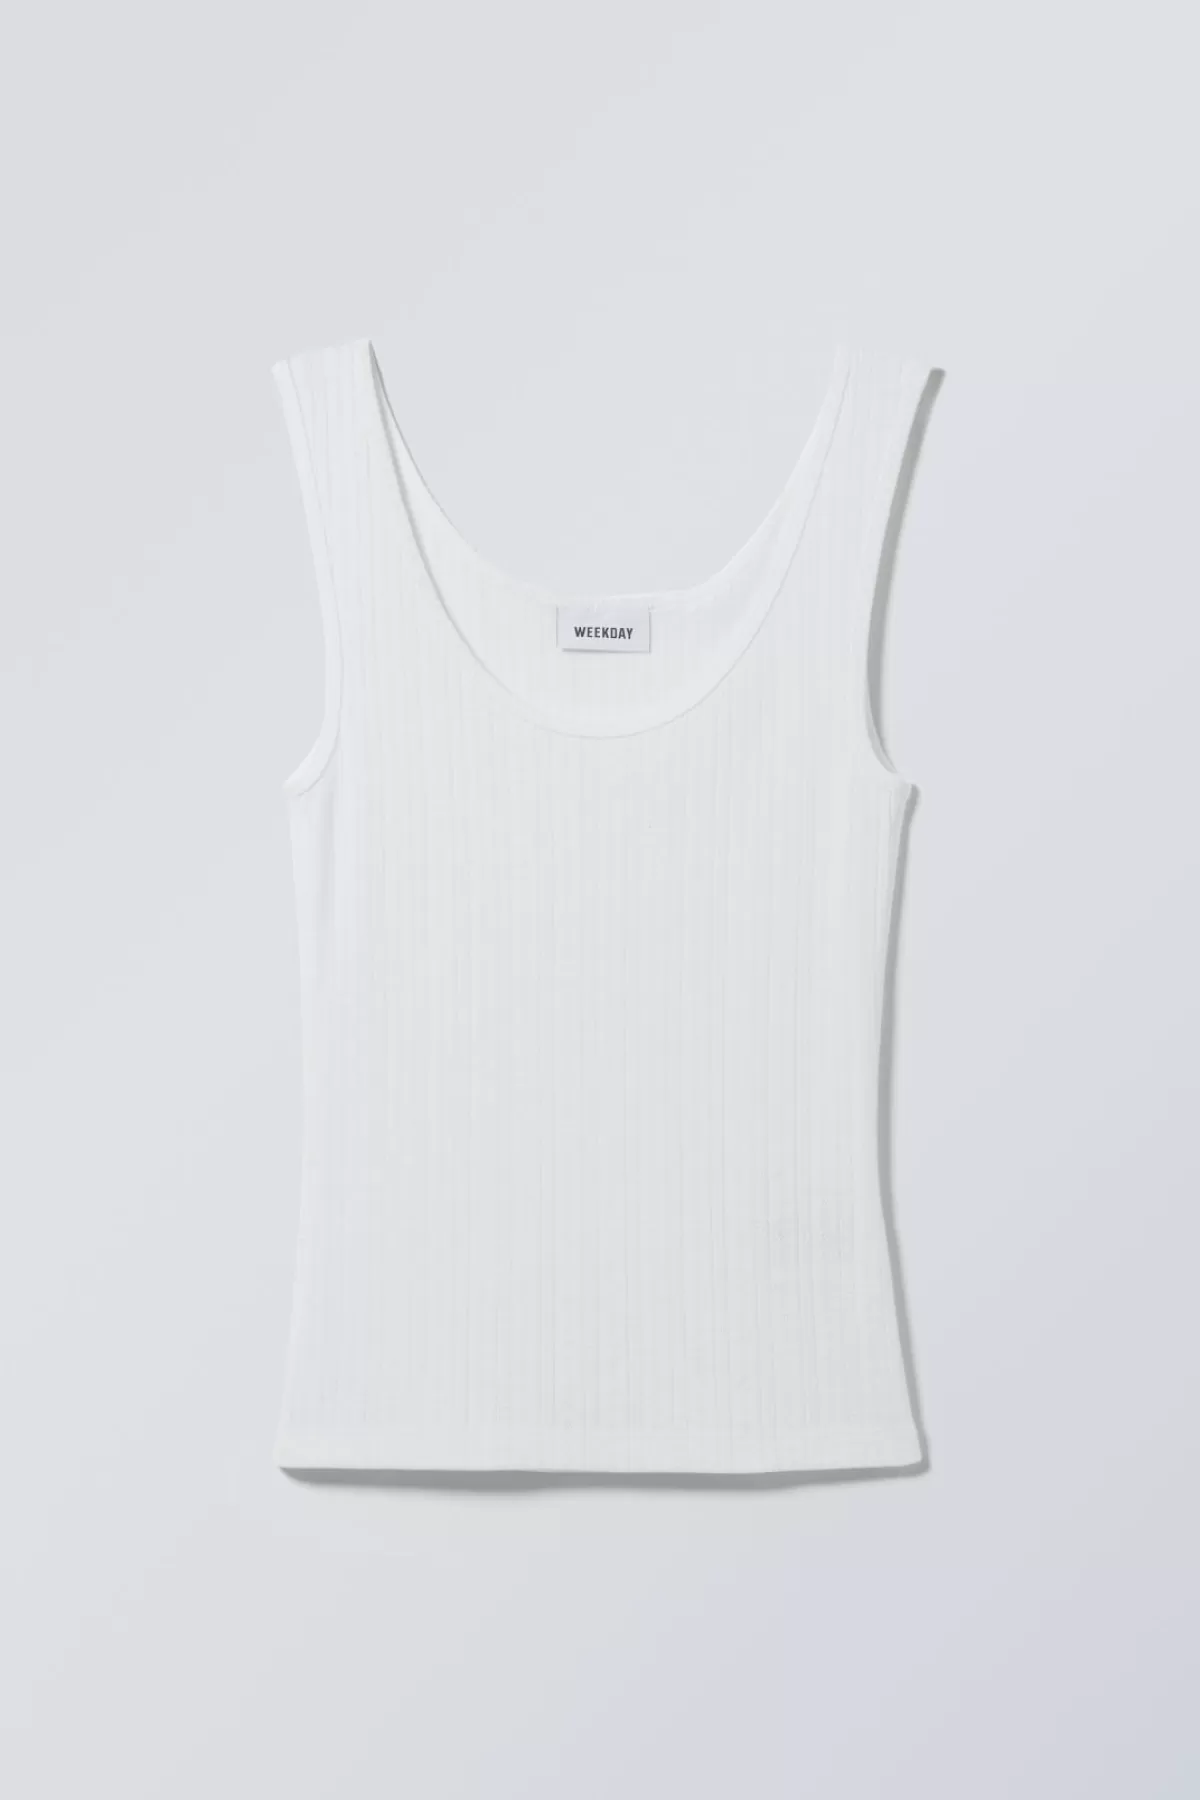 Weekday Fitted Pointelle Tank Top White Sale